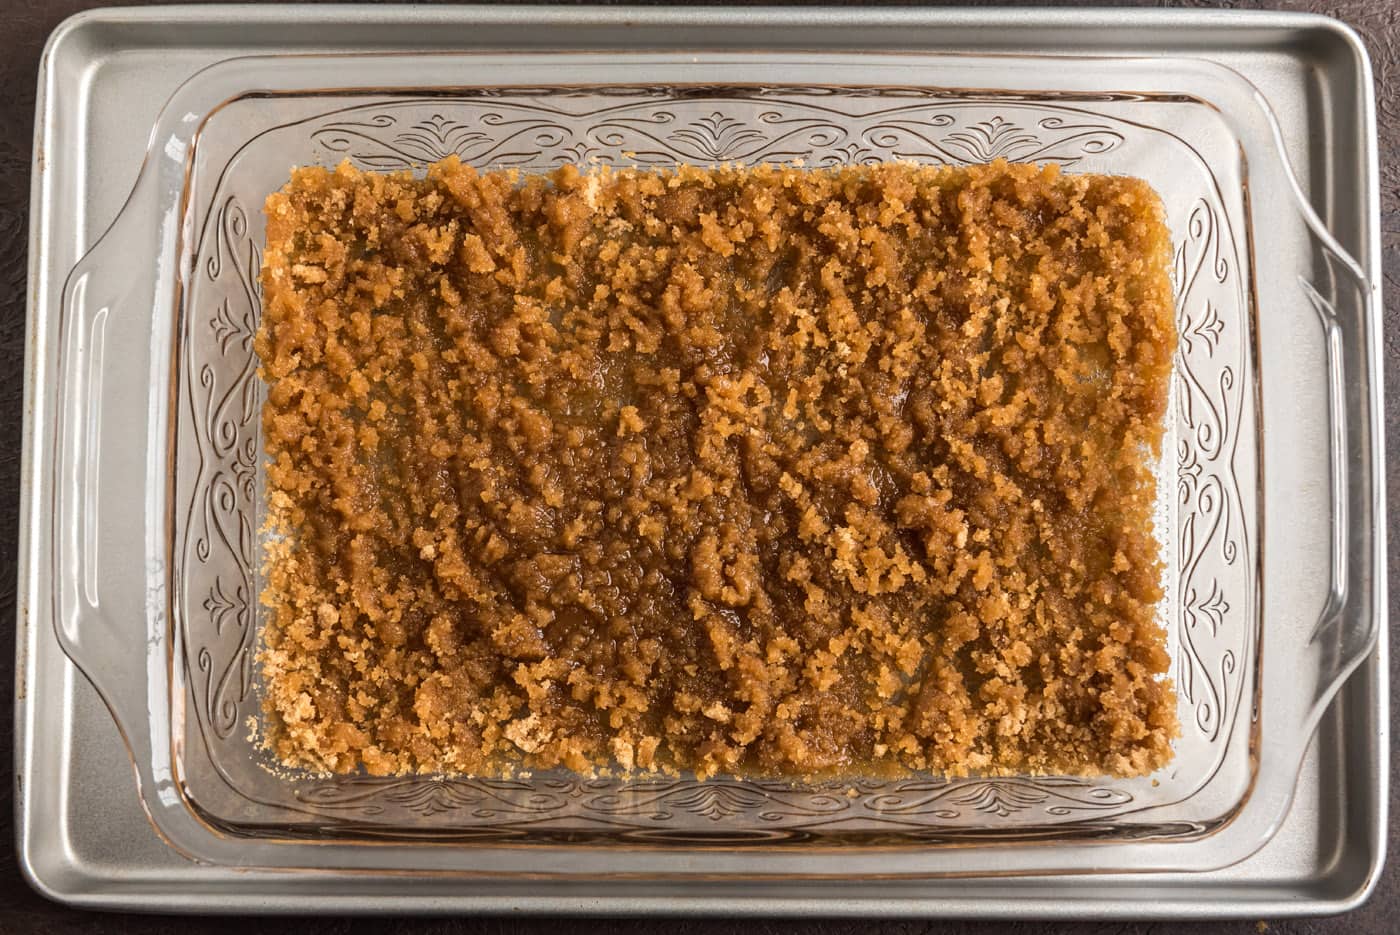 brown sugar and butter mixture in a baking dish